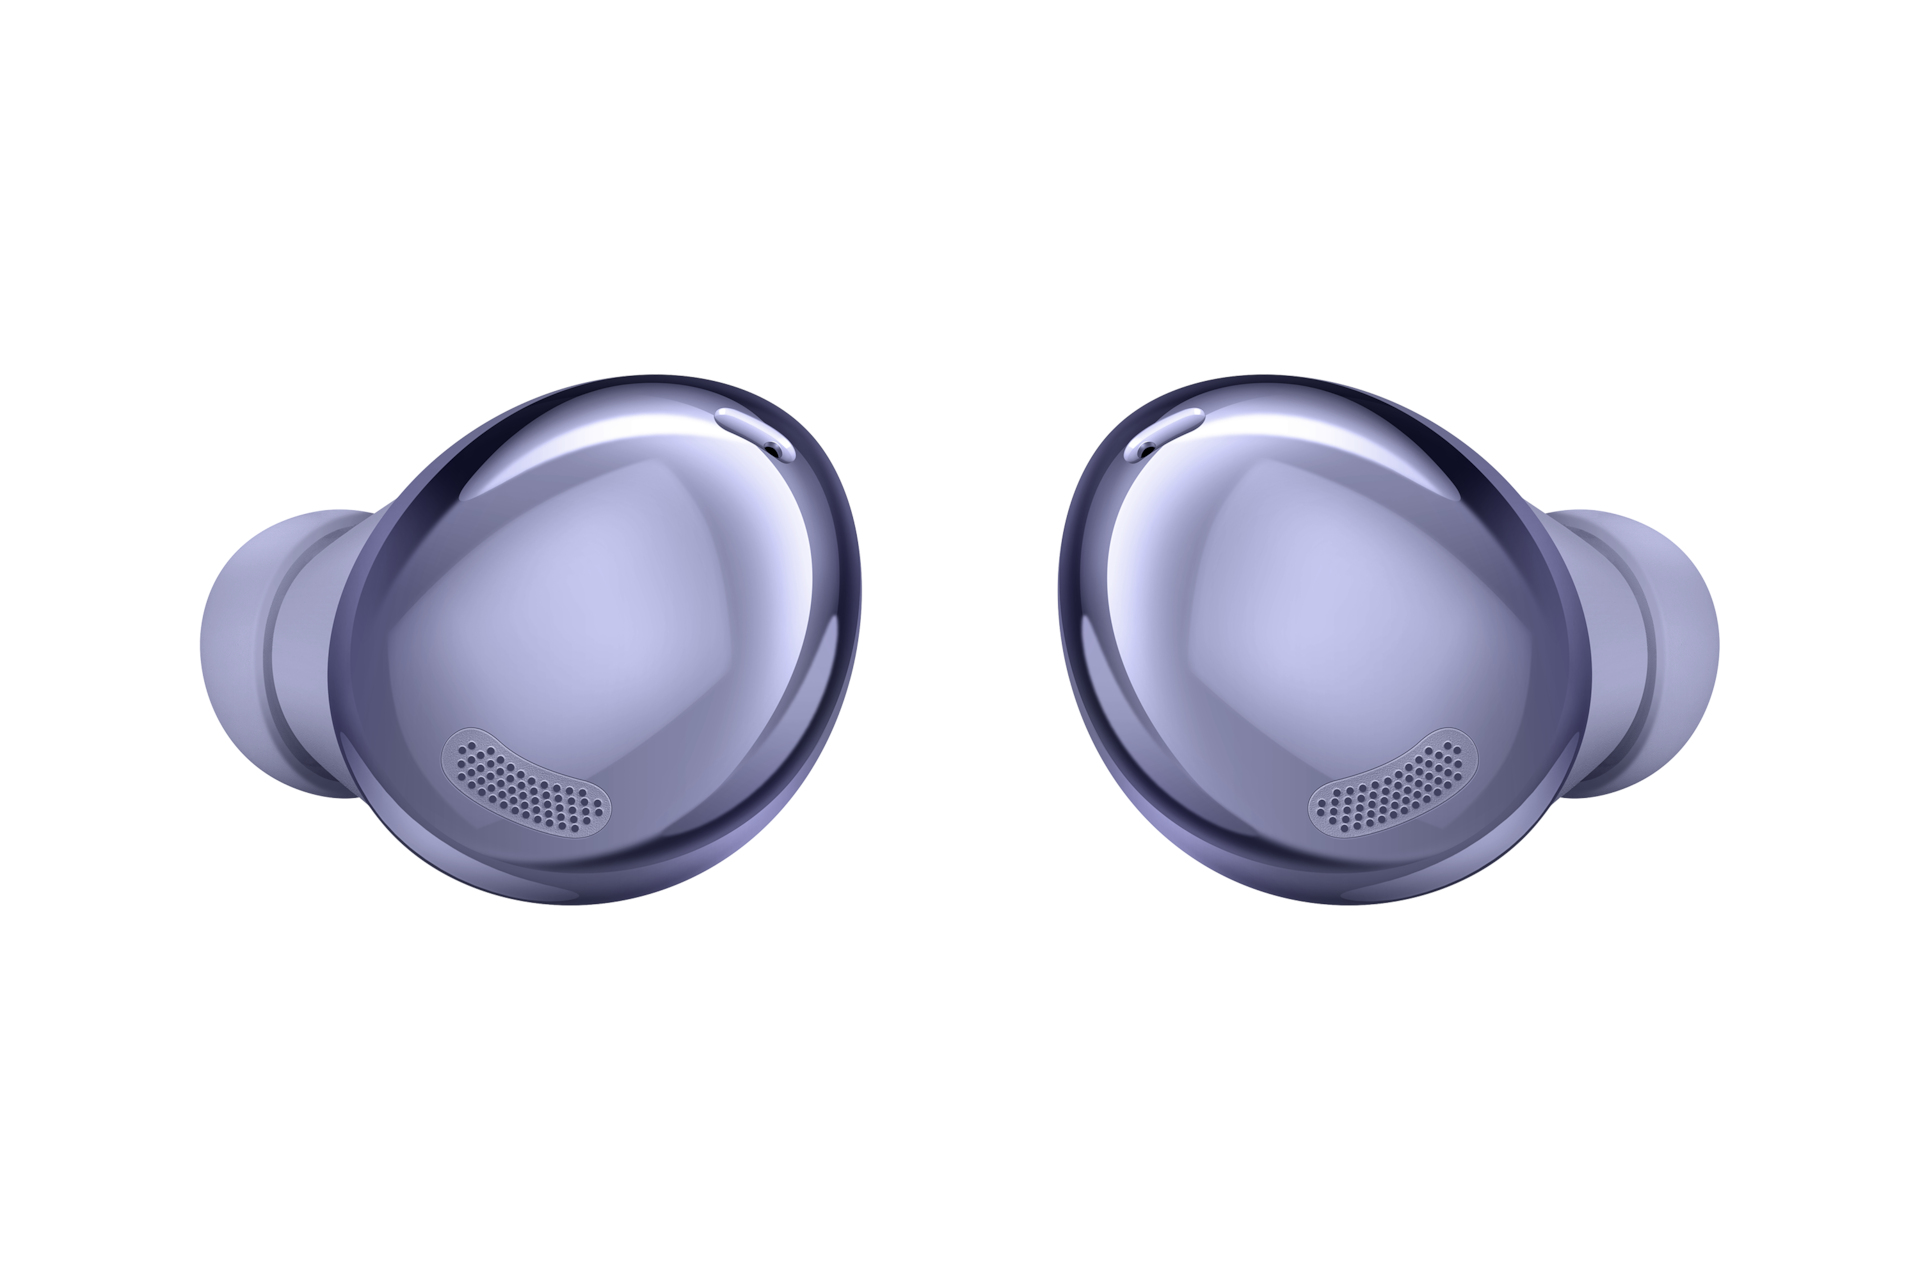 Galaxy Buds: Official Introduction